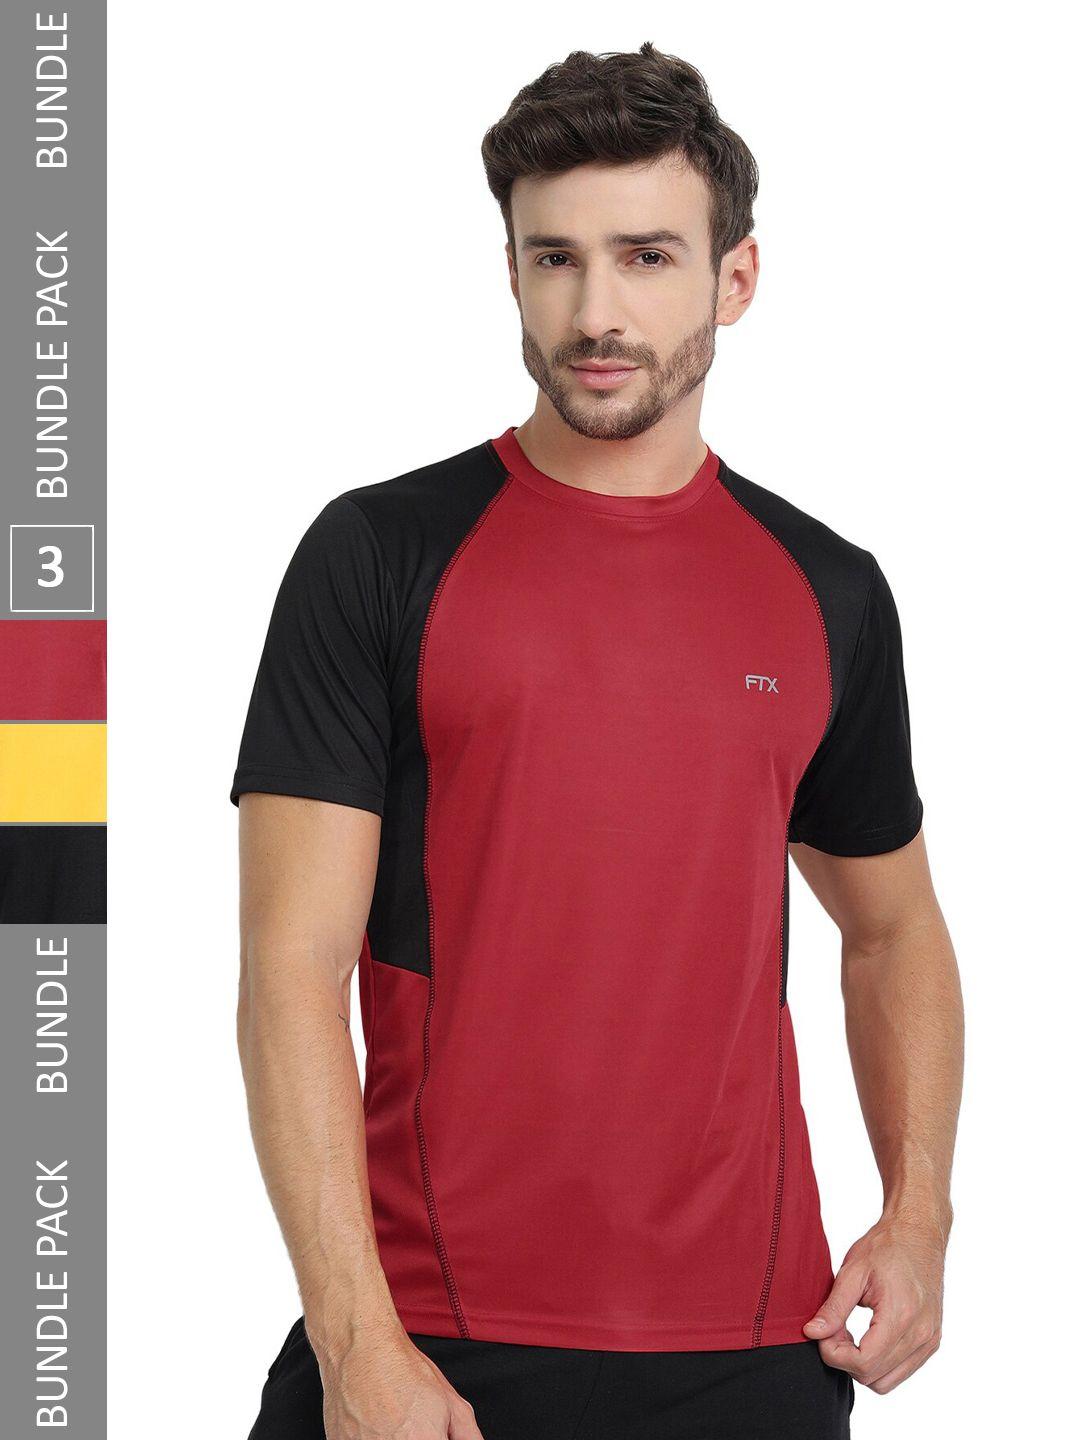 ftx pack of 3 colourblocked round neck dry fit sports t-shirt